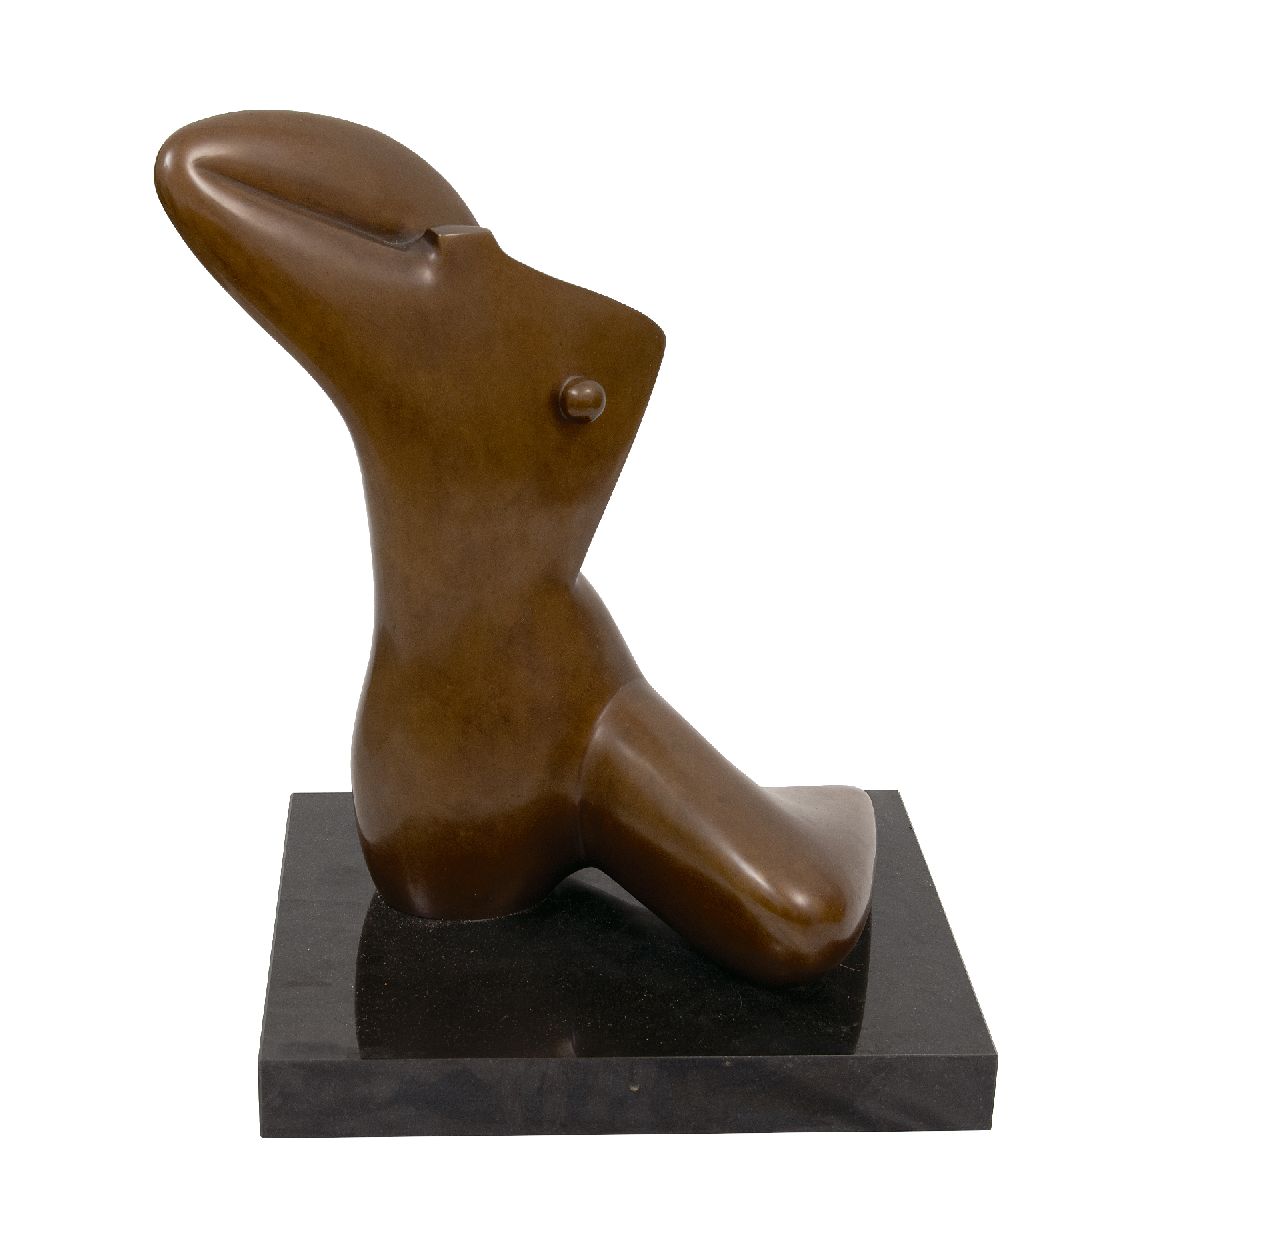 Pecego G.  | Gloria Pecego | Sculptures and objects offered for sale | Woman figure, bronze 45.0 cm